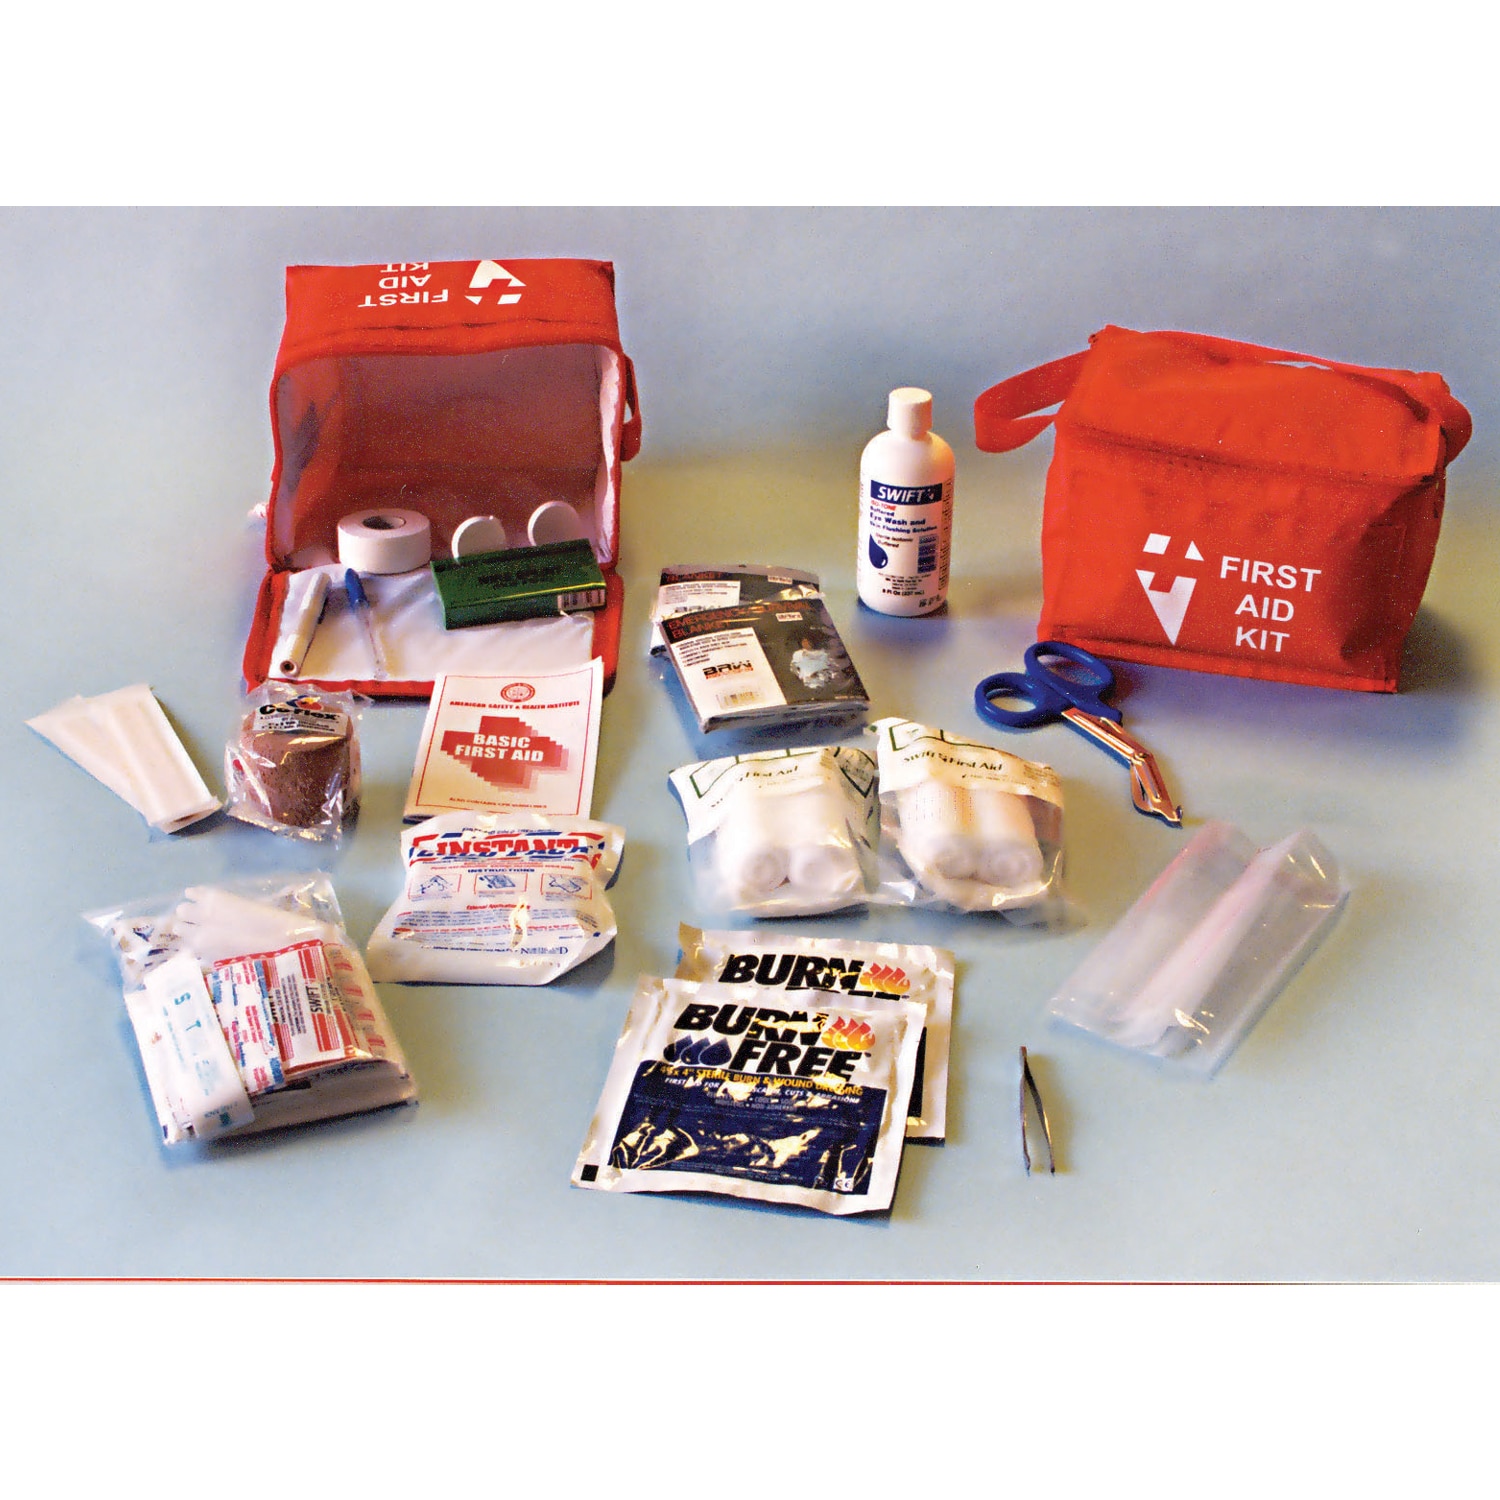 Kit, First Aid, 15 Person, Zippered Storage Case, 23" x 16" x 18"